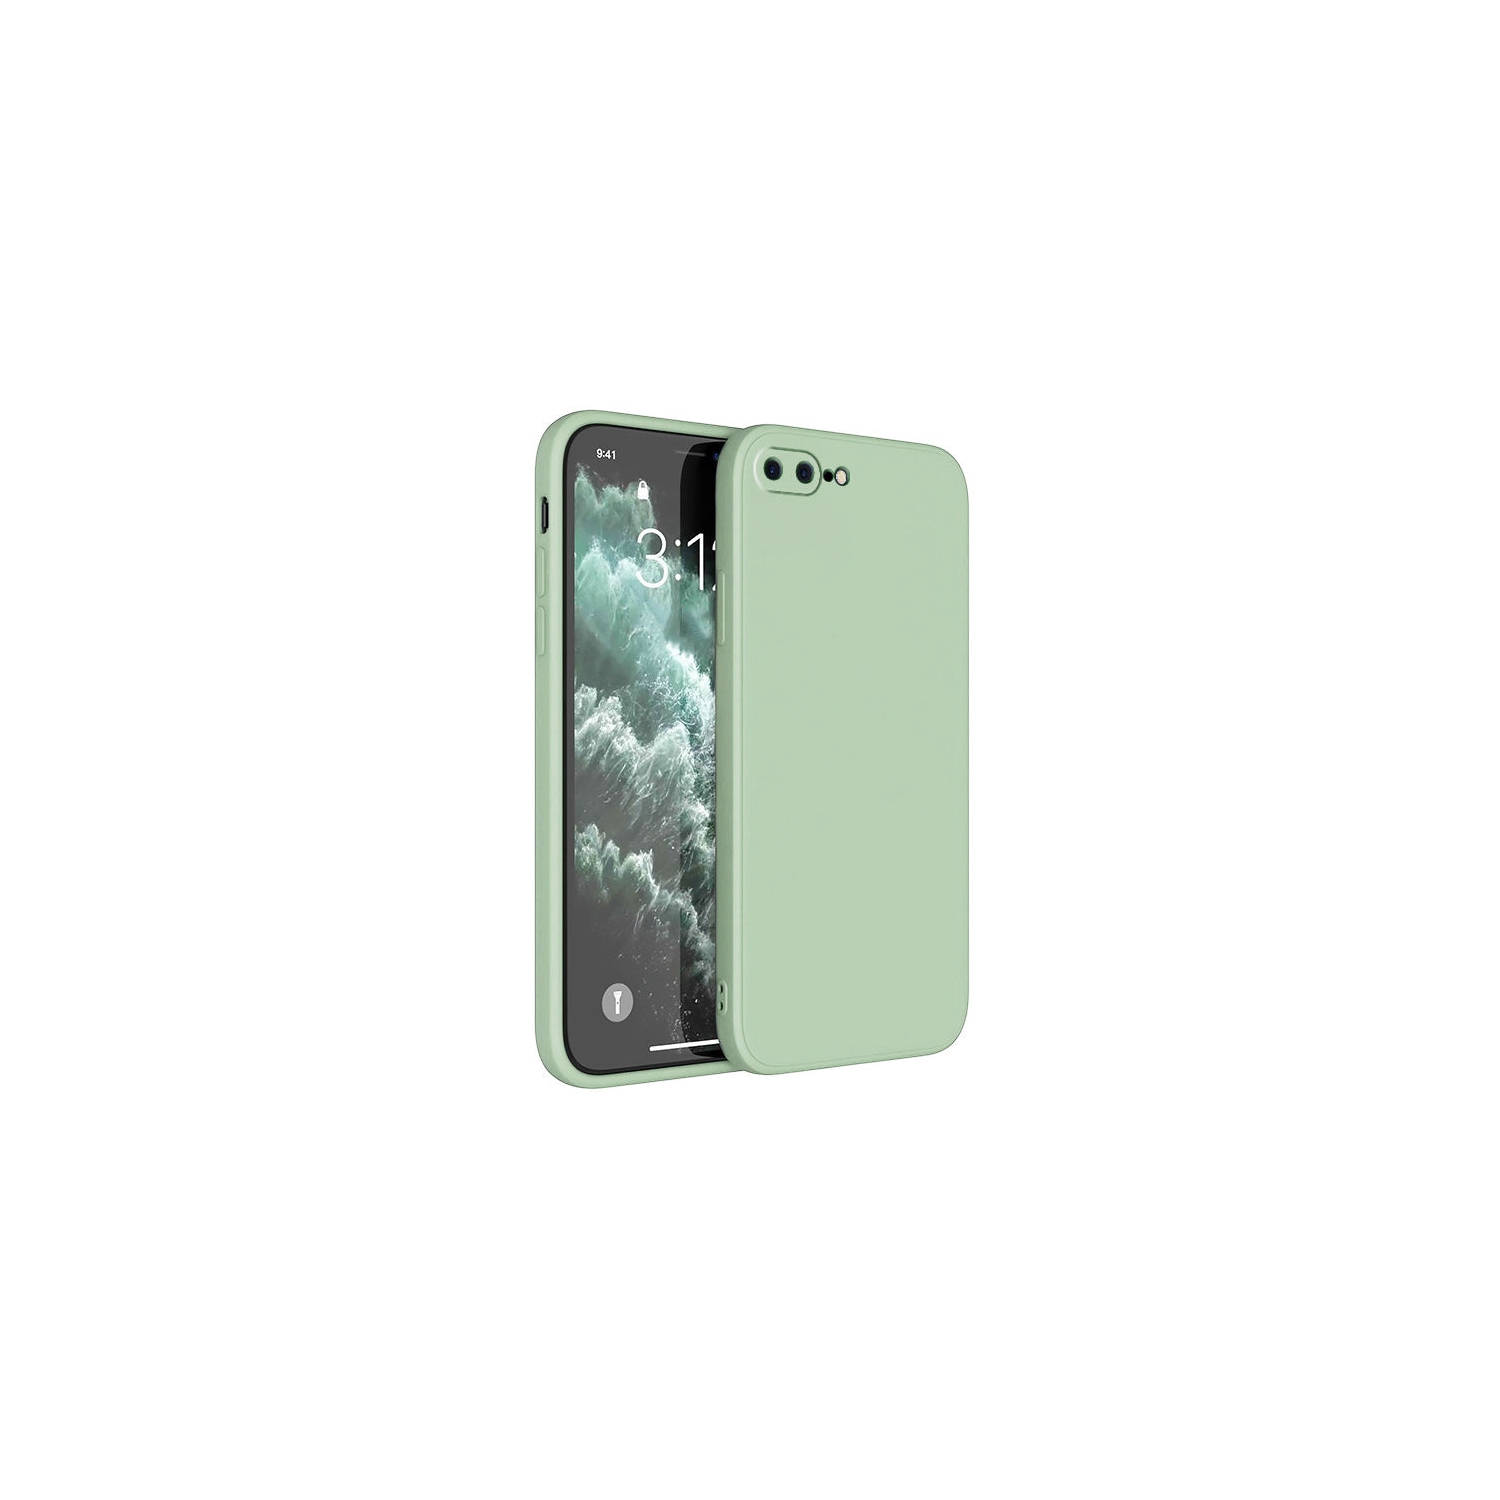 PANDACO Soft Shell Matte Matcha Case for iPhone 7 Plus or iPhone 8 Plus